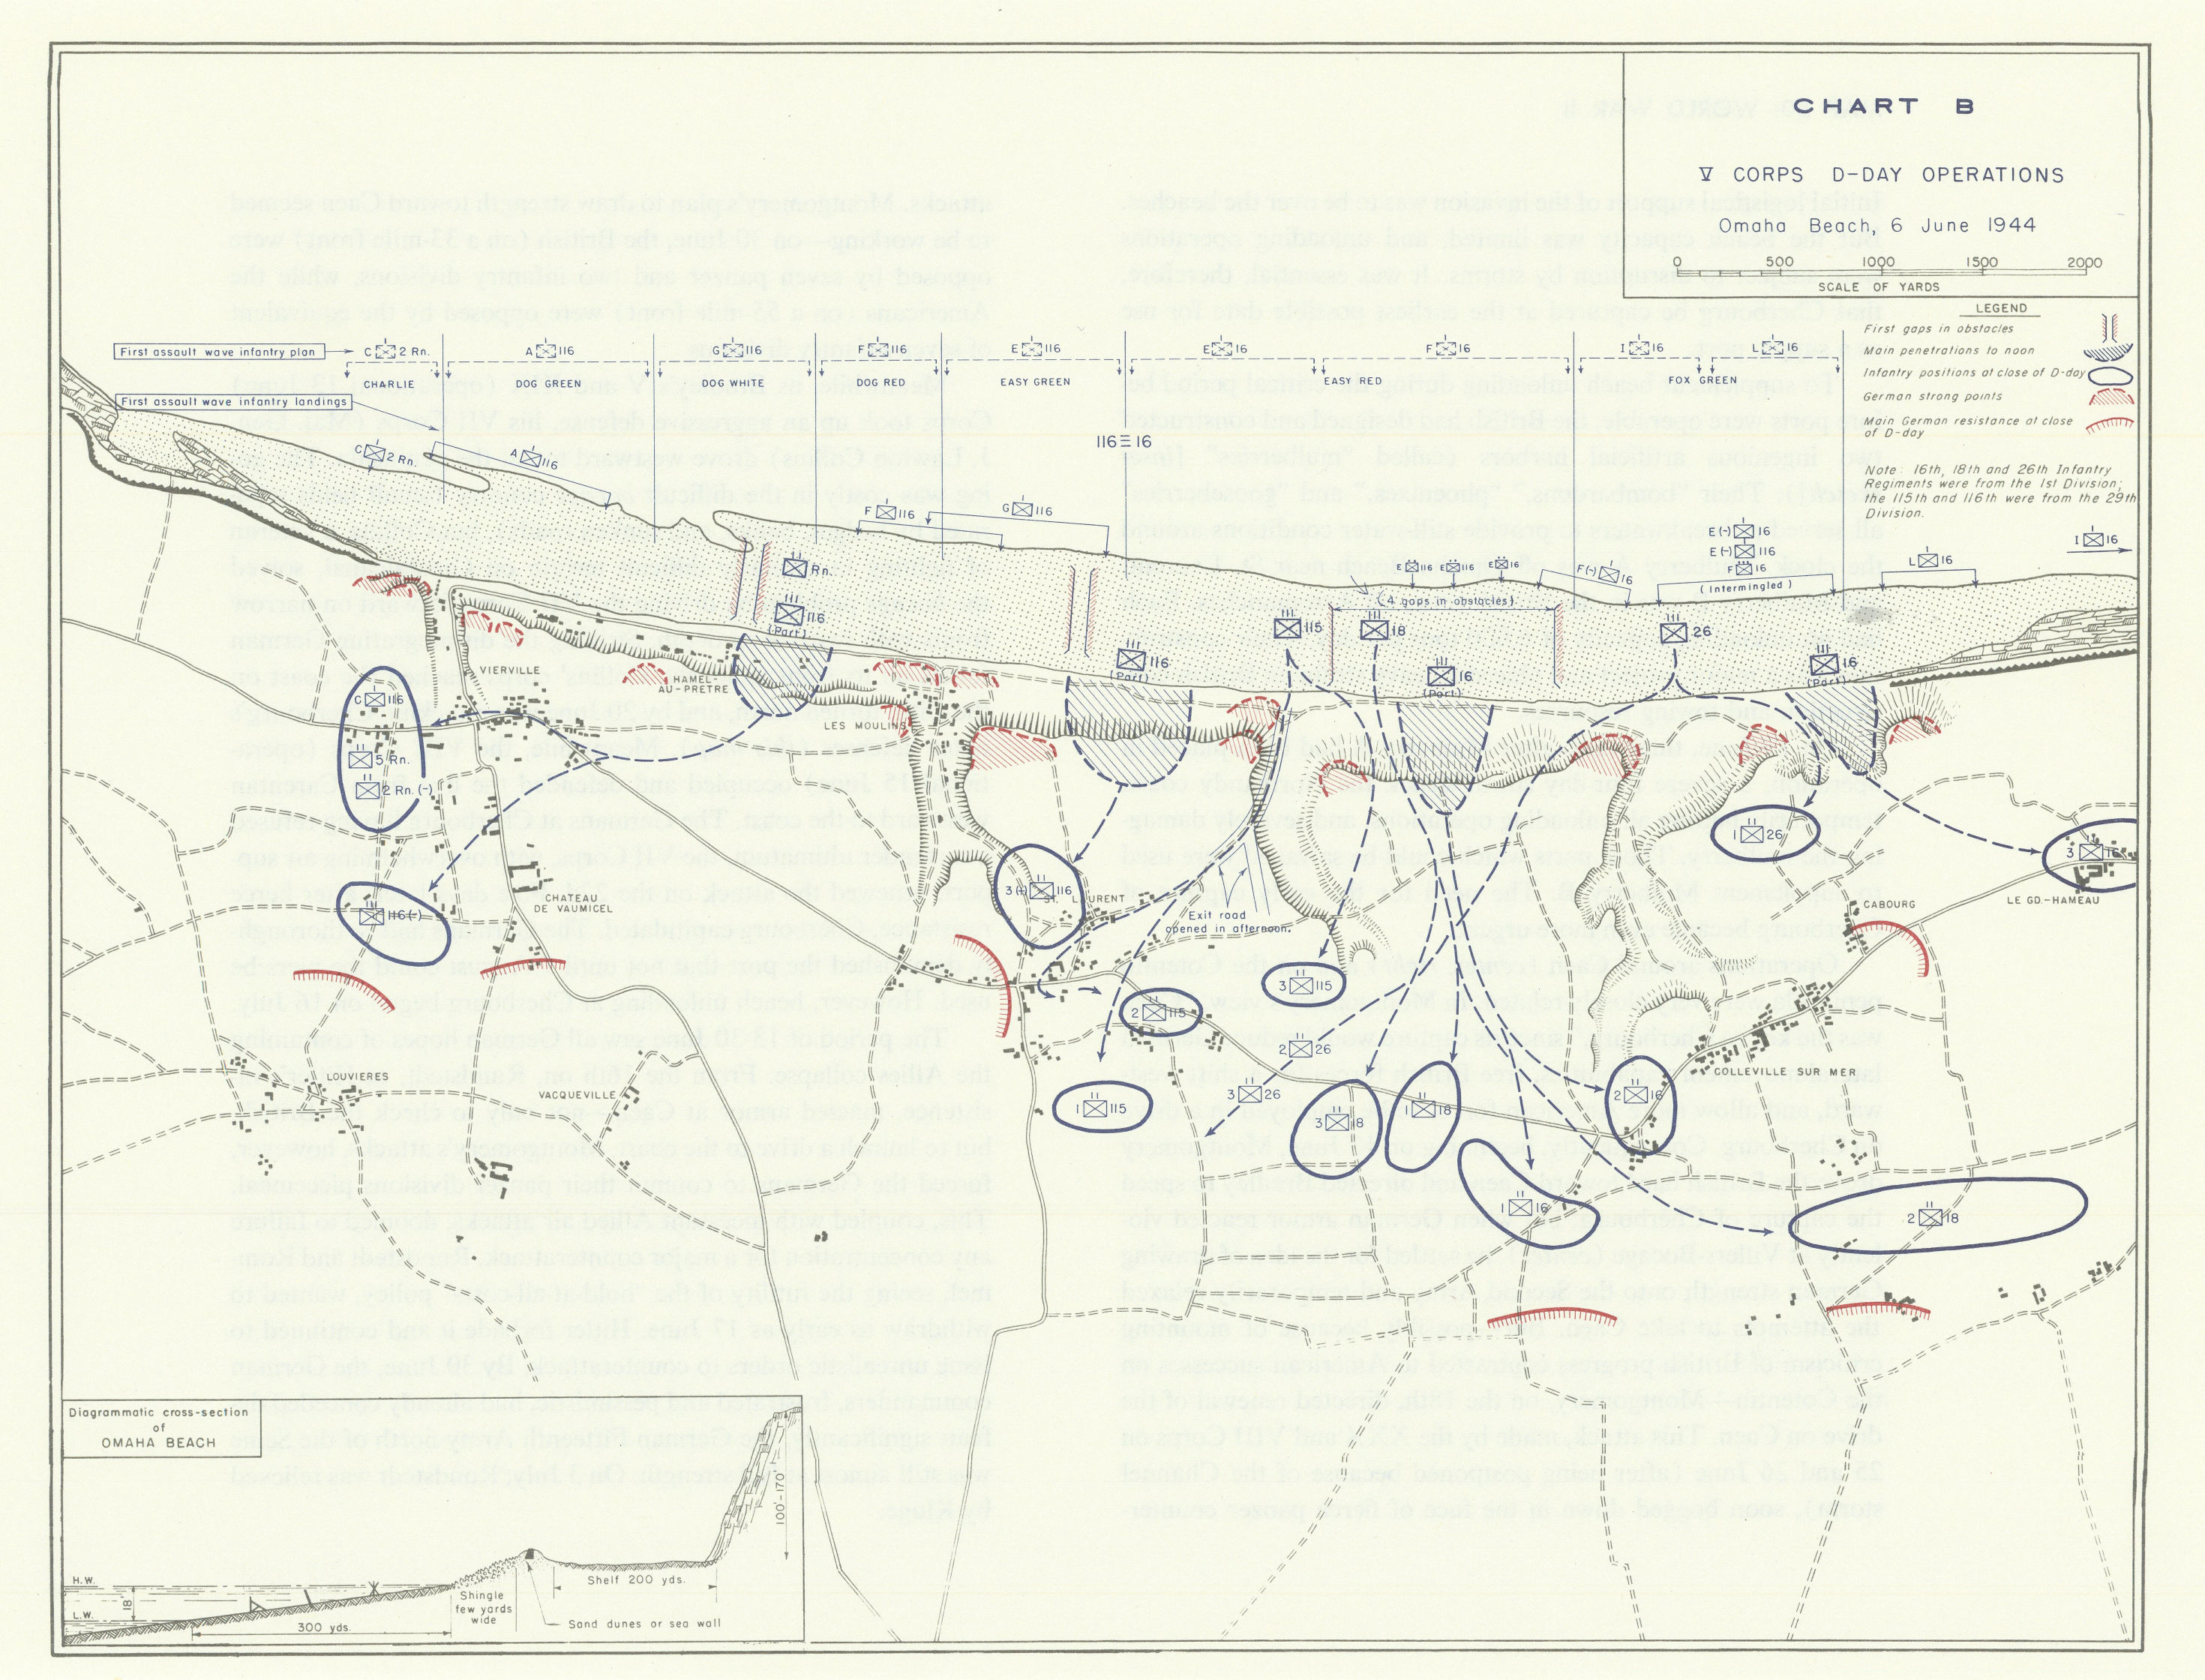 World War 2. V Corps D-Day Operations, 6 June 1944. Omaha Beach 1959 old map